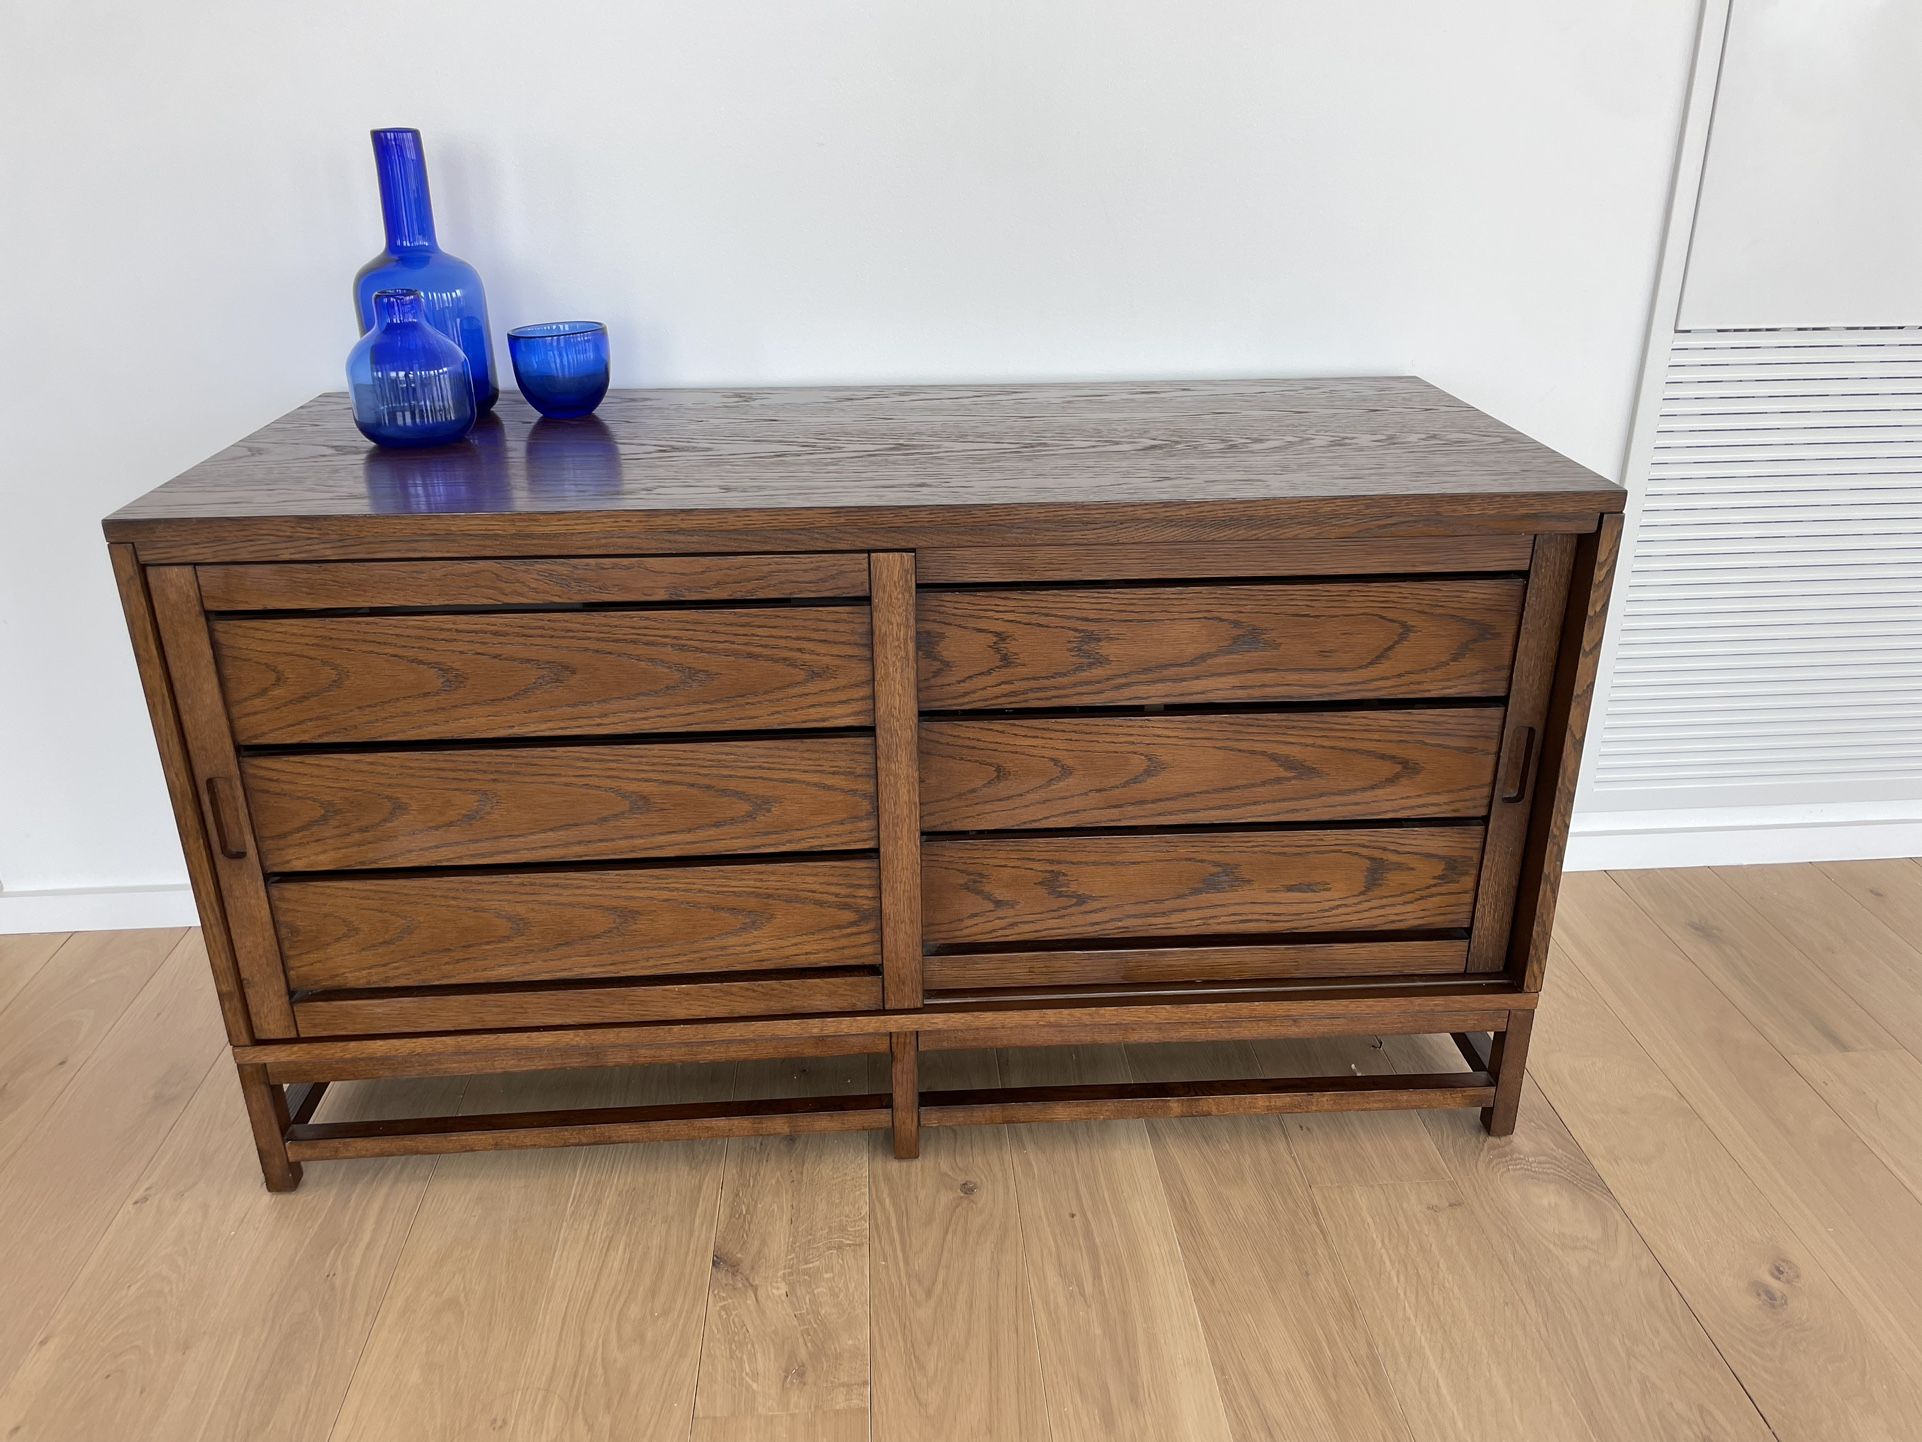 Crate and Barrel Clapboard Media Storage / Dining Sideboard